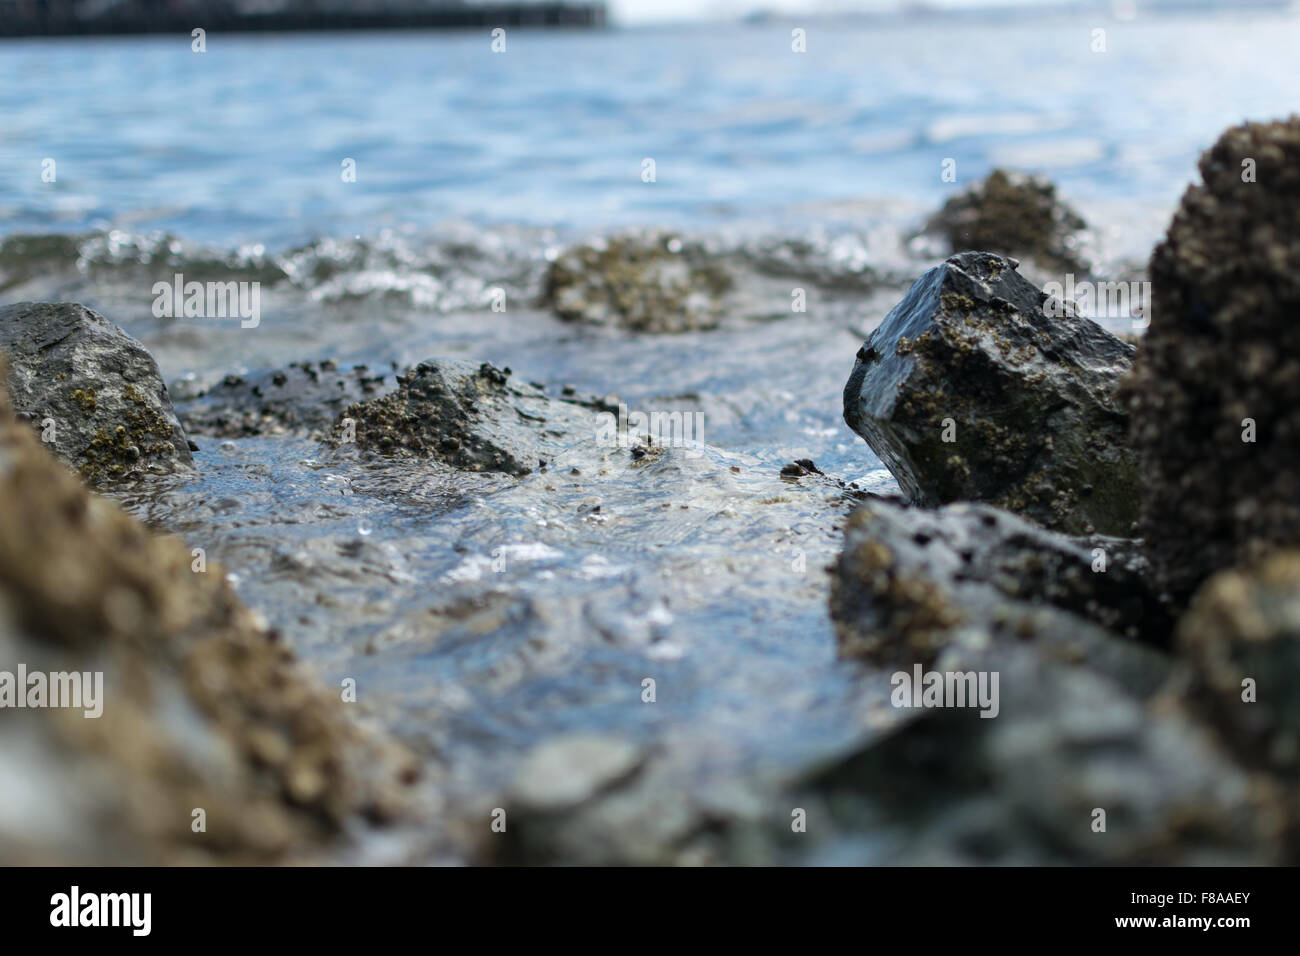 A shot in shallow focus of the interaction between the incoming tides and the rocky shore. Stock Photo